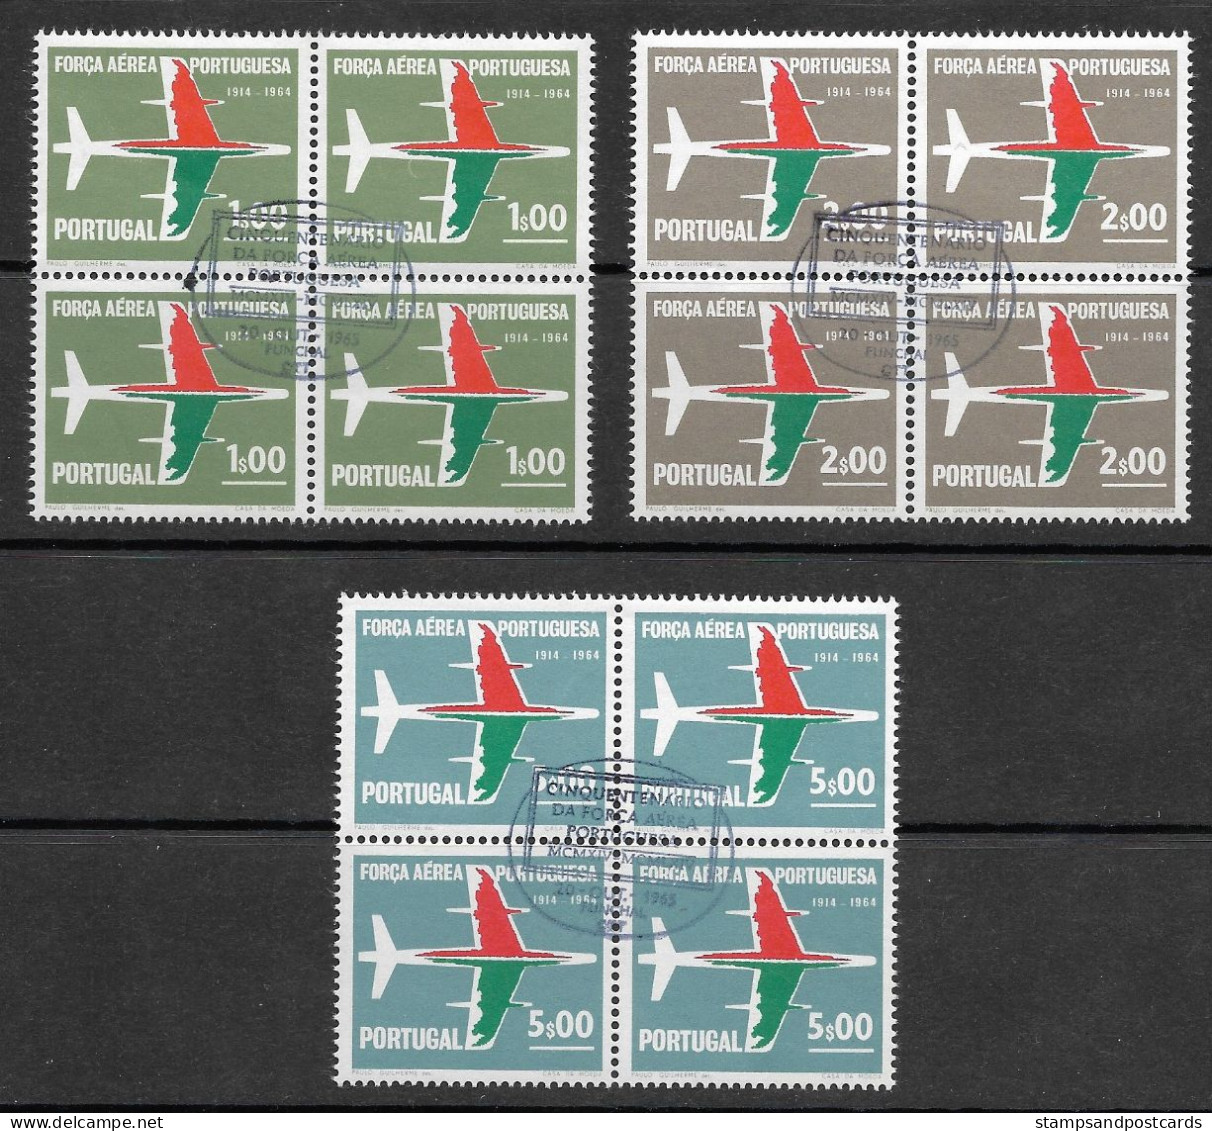 Portugal 1965 Armée De L' Air 50 Ans Air Force 50 Years X 4 Cachet Premier Jour Funchal Madeira Madère - Used Stamps